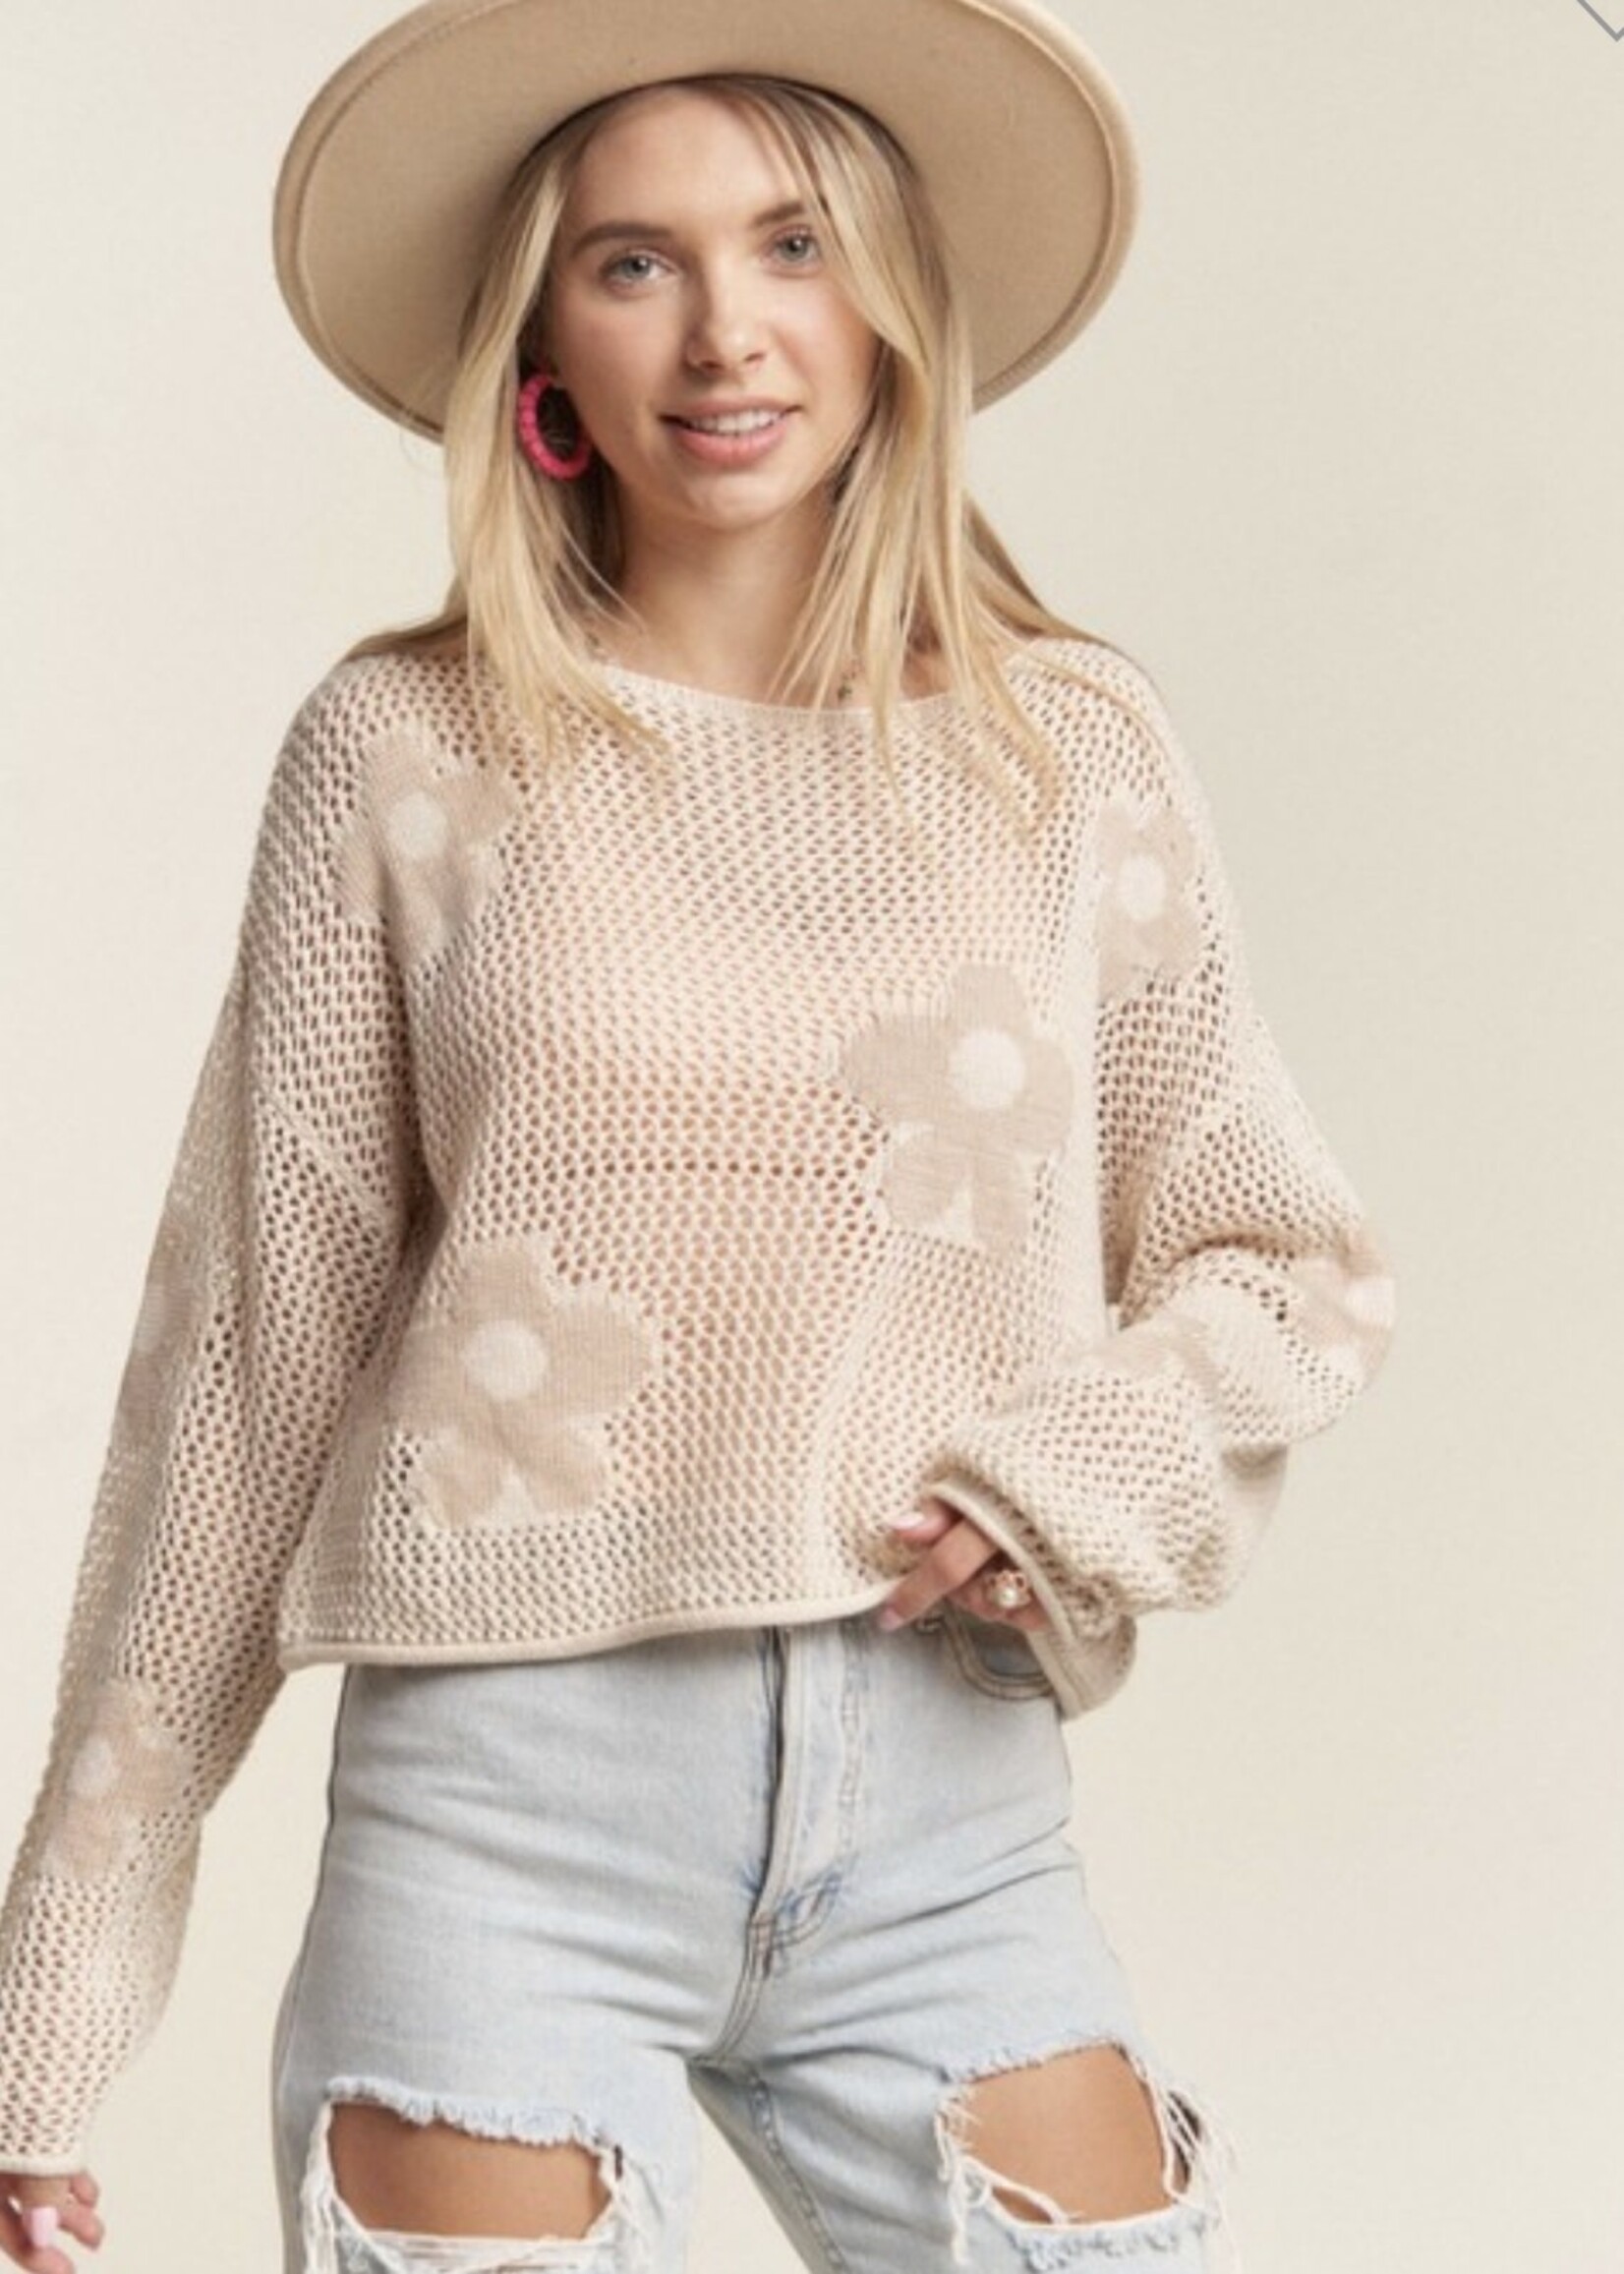 Daisy Mae Floral Sweater